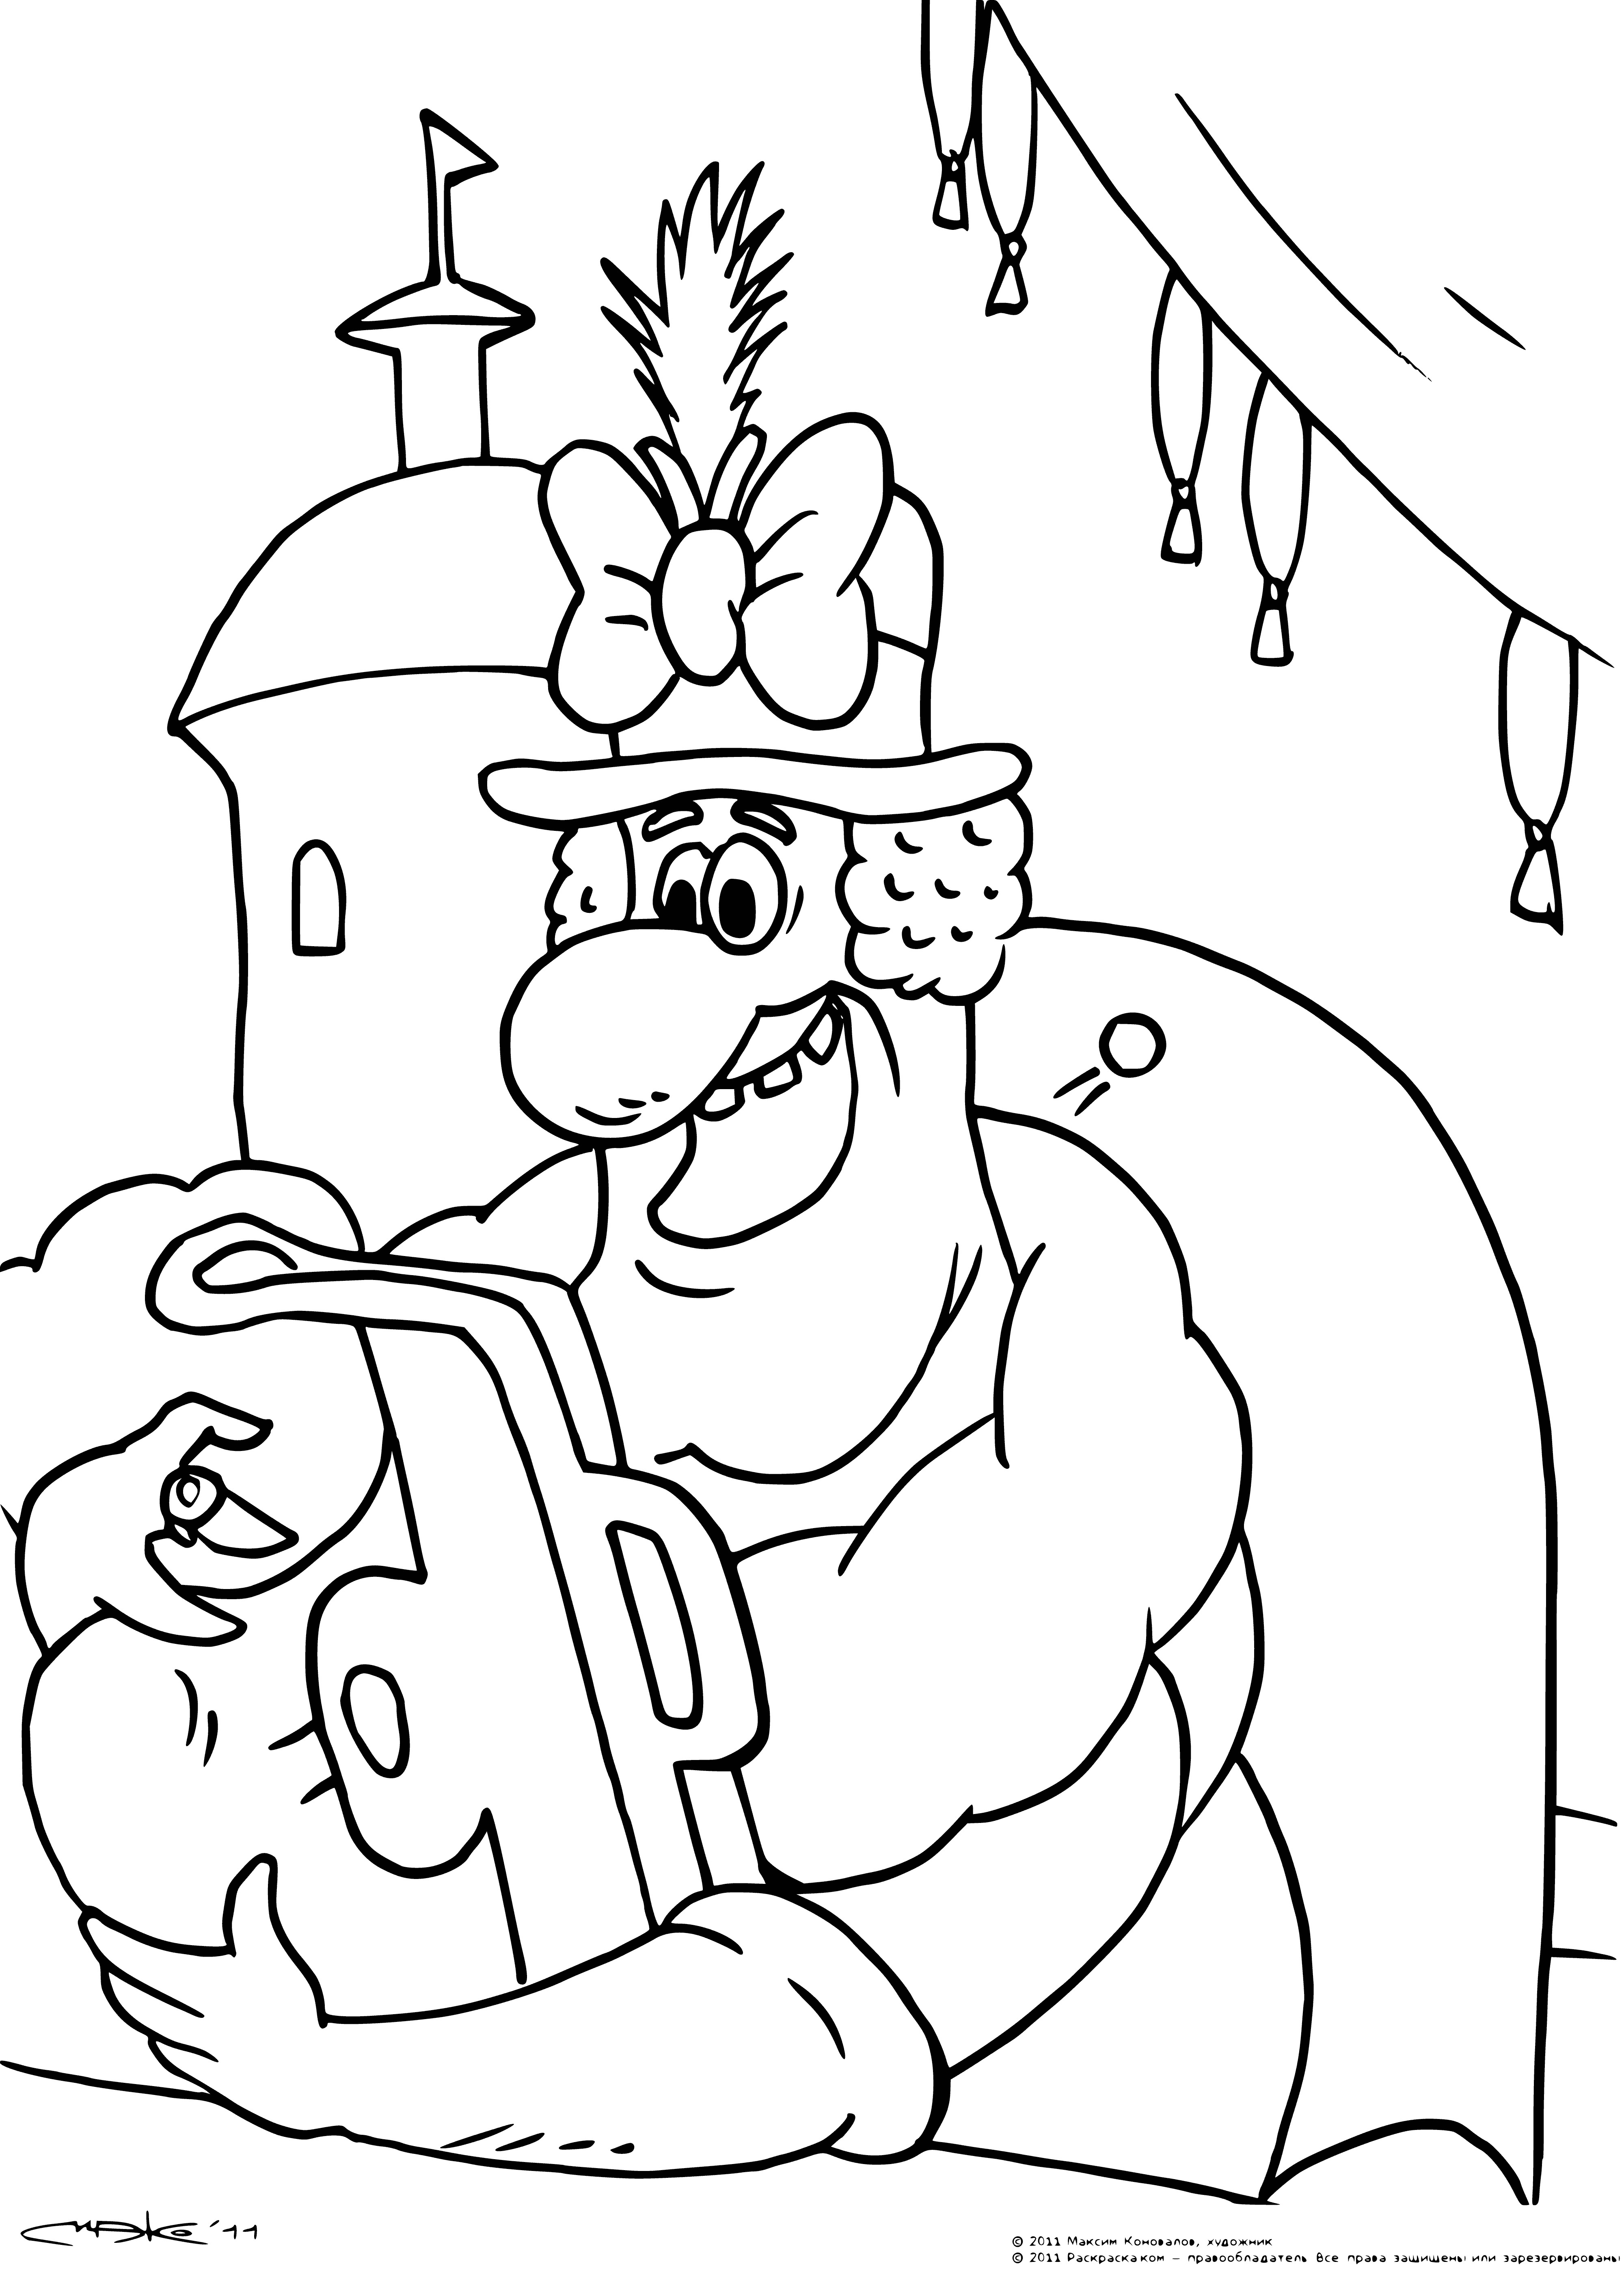 coloring page: Two figures, each with different colored clothing, jump to catch the falling numbers, creating a large number one from smaller numbers on this coloring page.